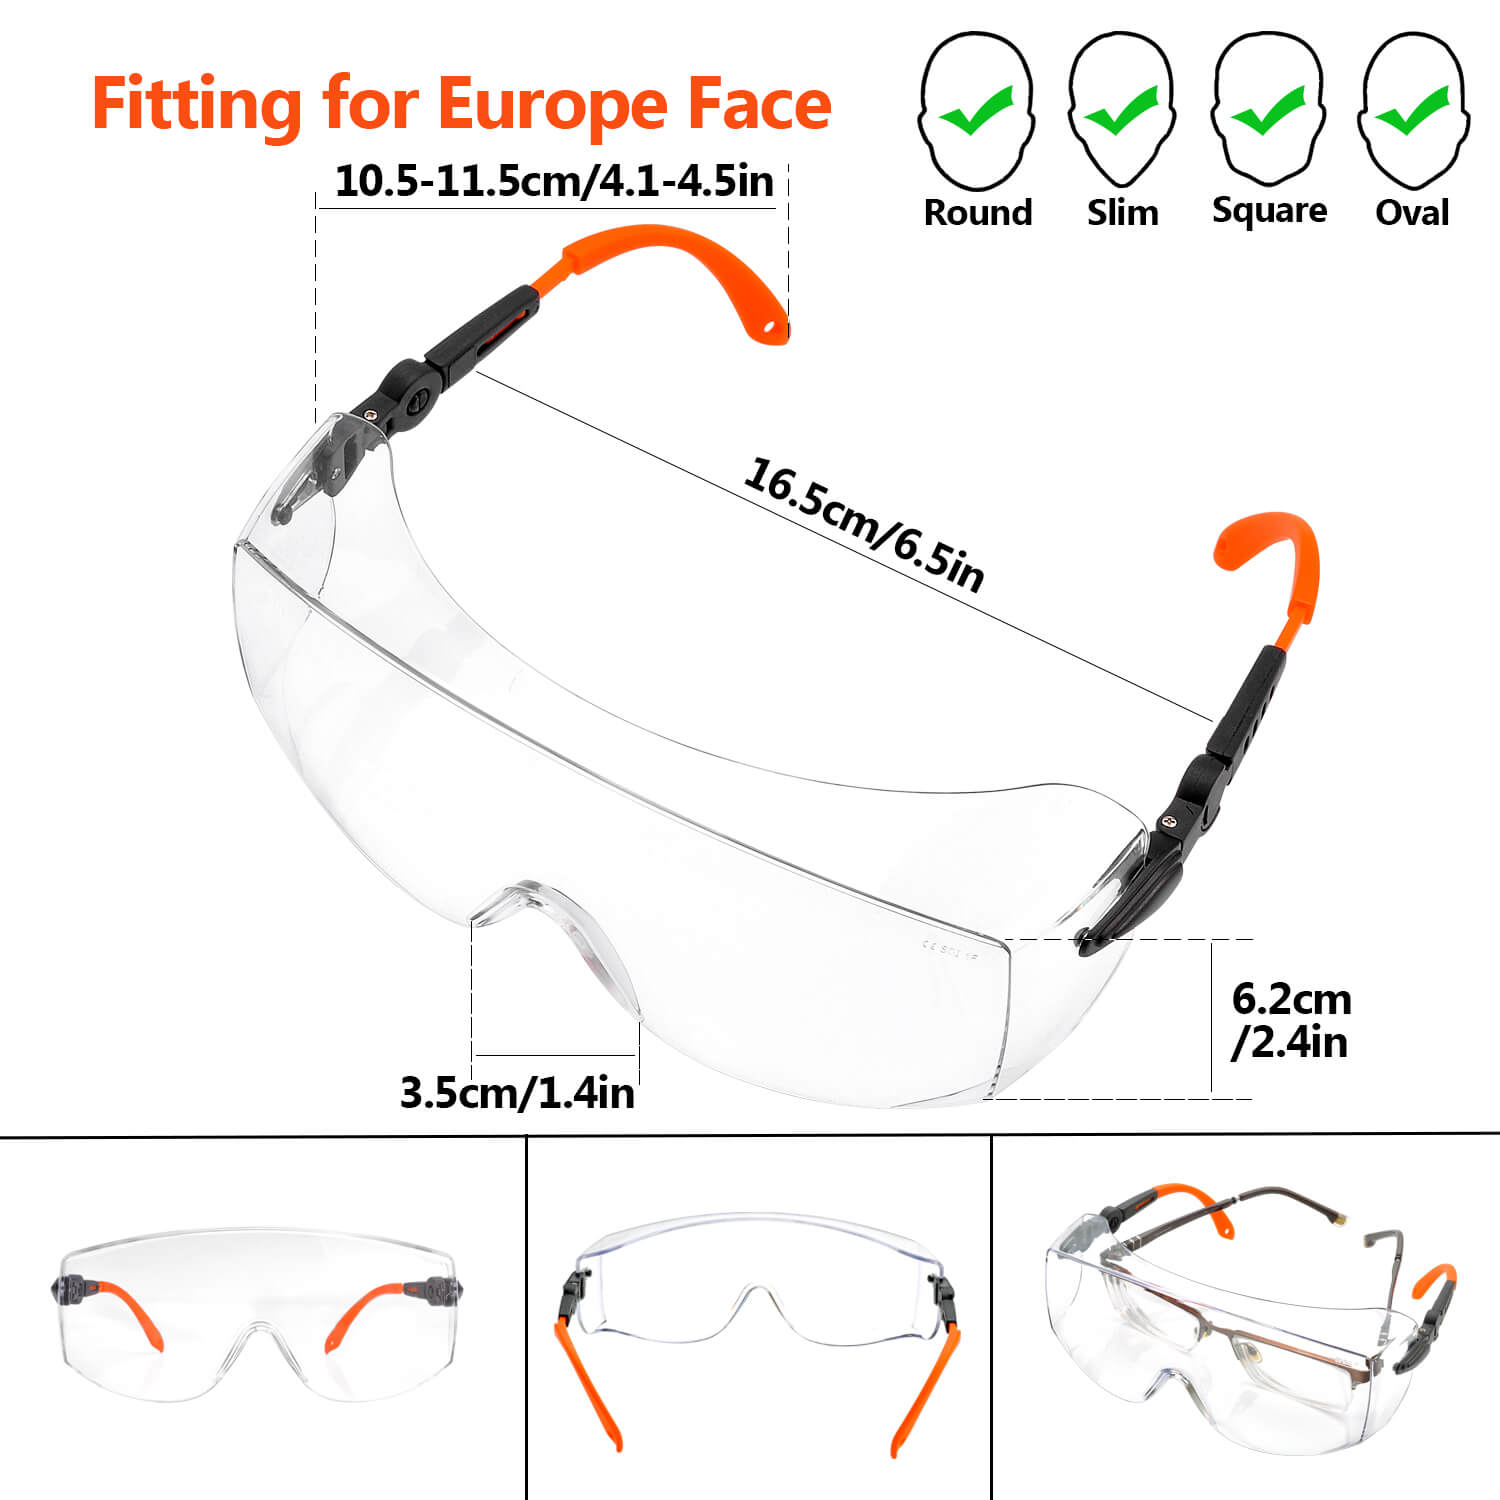 Safeyear Fogless Overglasses Safety Goggles with Z87 Fogless Coating